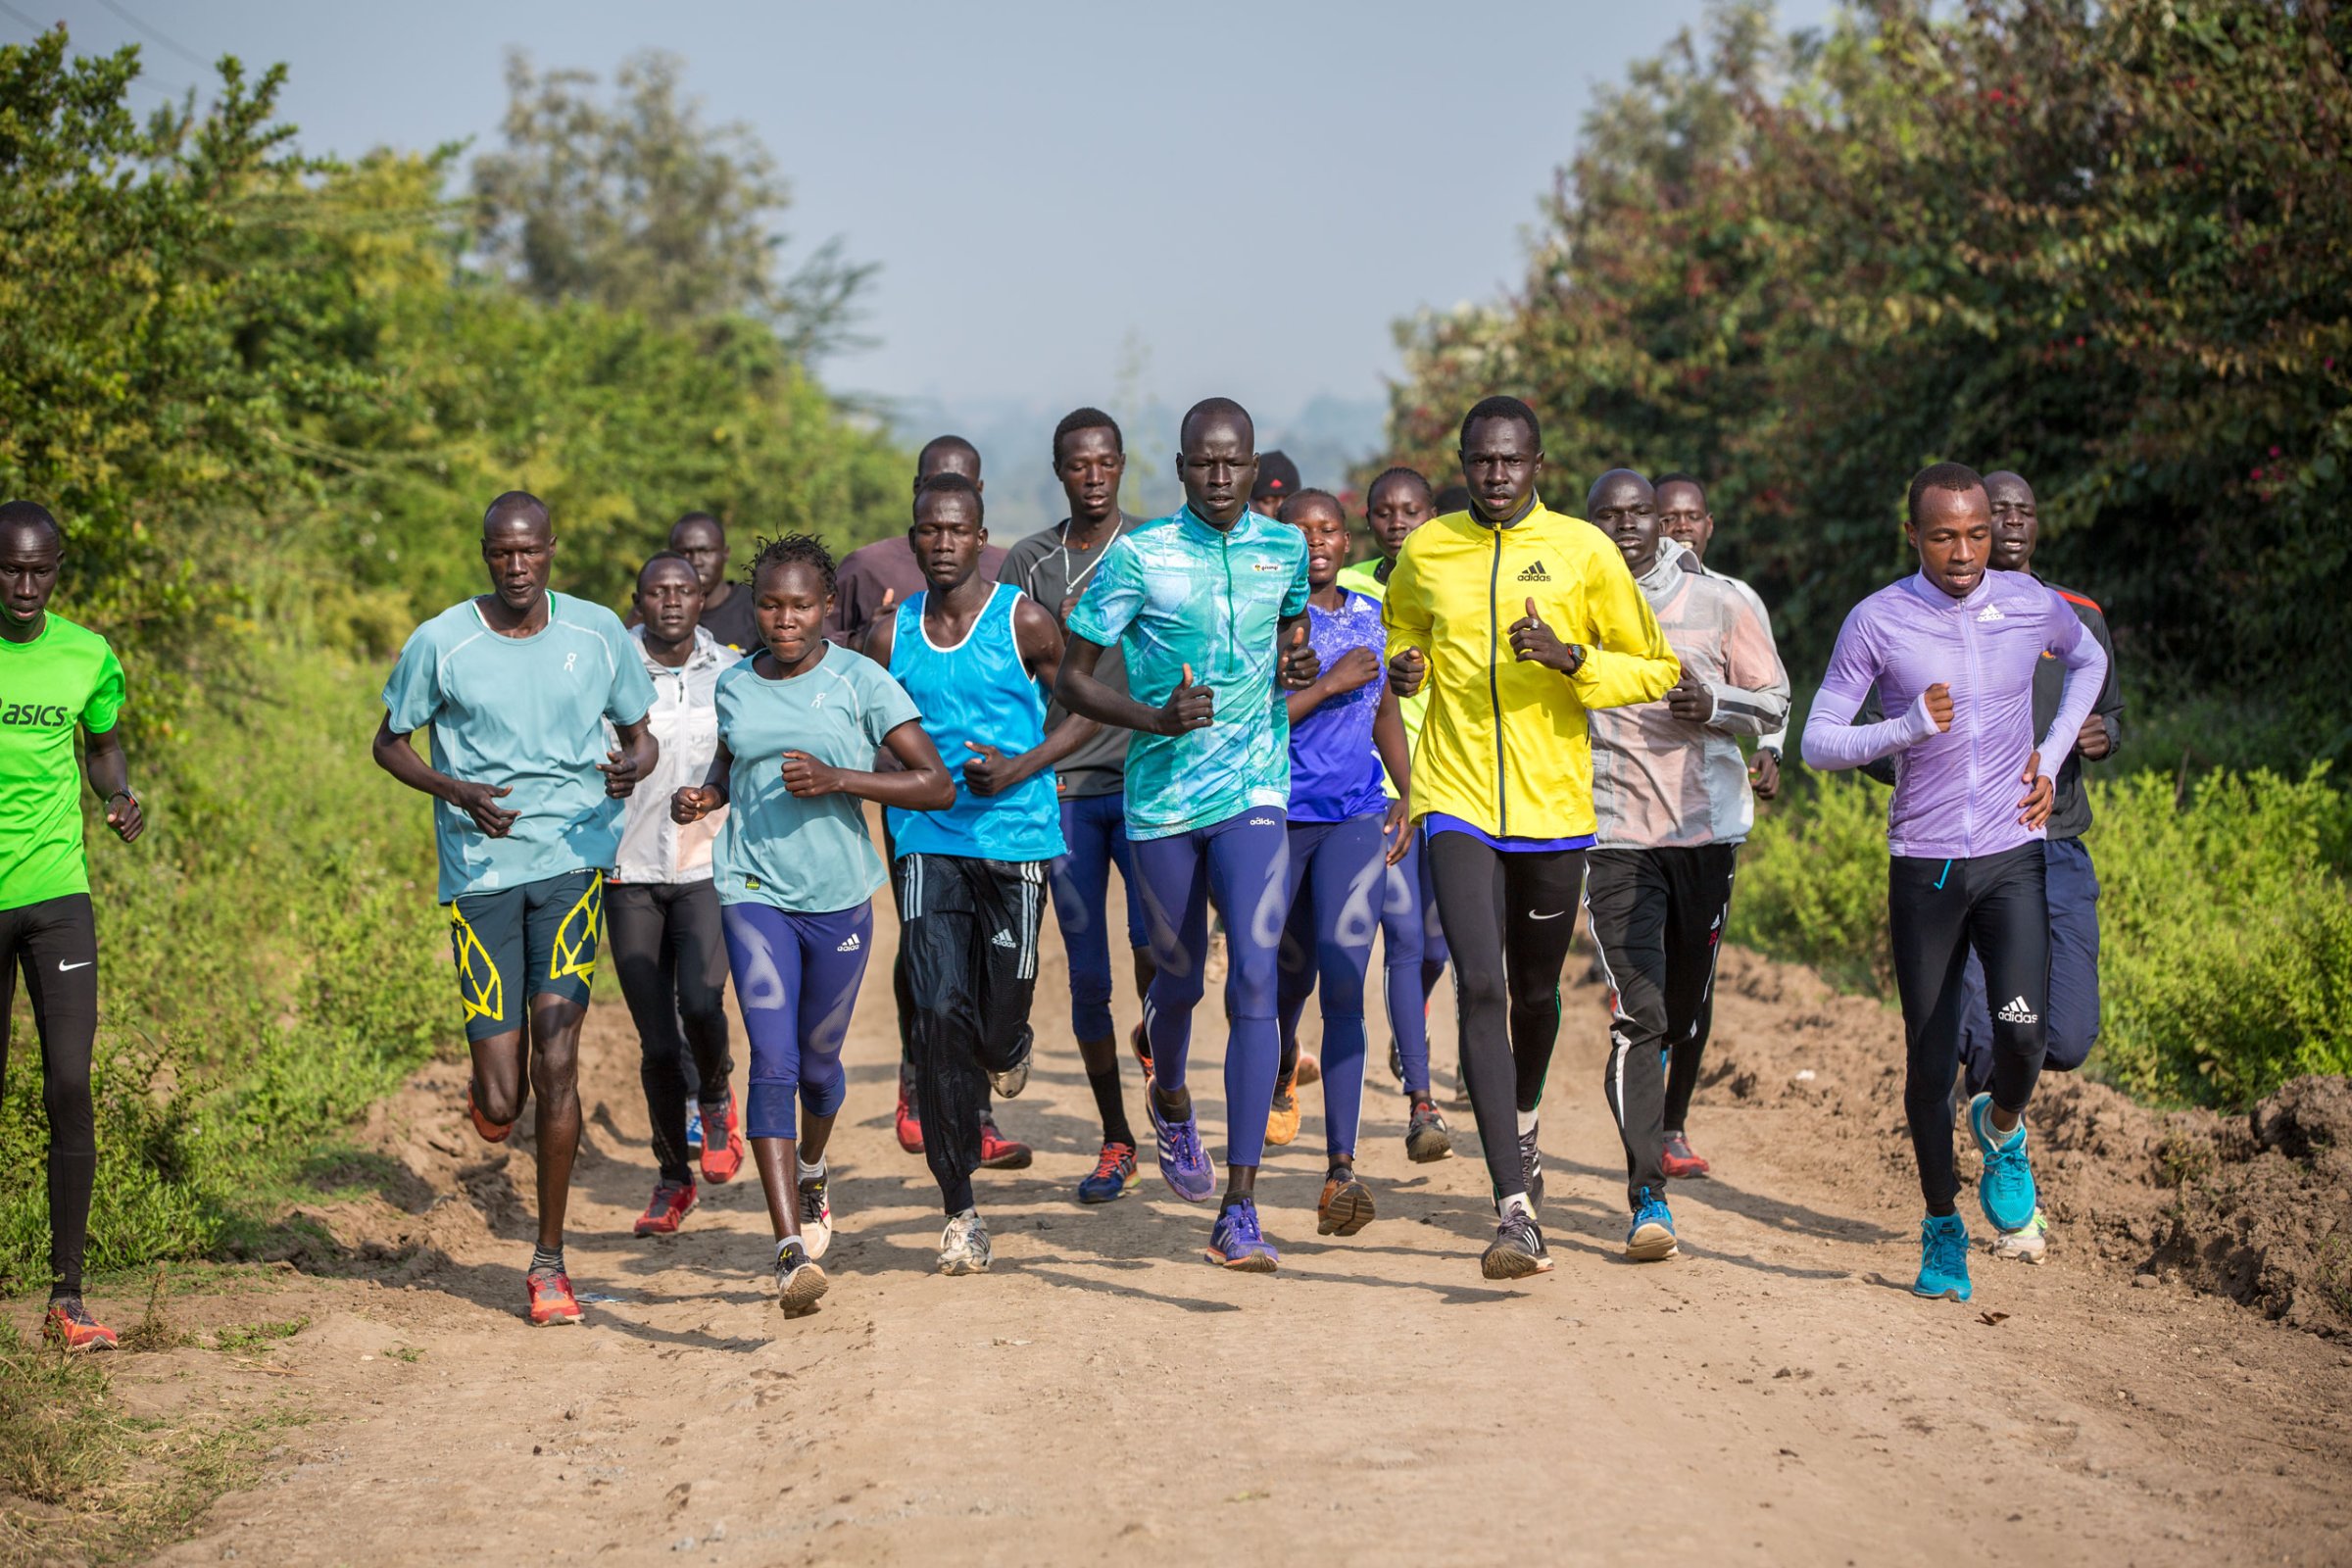 At Loroupe’s training center in Kenya, refugee runners worked hard to earn one of 10 spots on the squad bound for Brazil